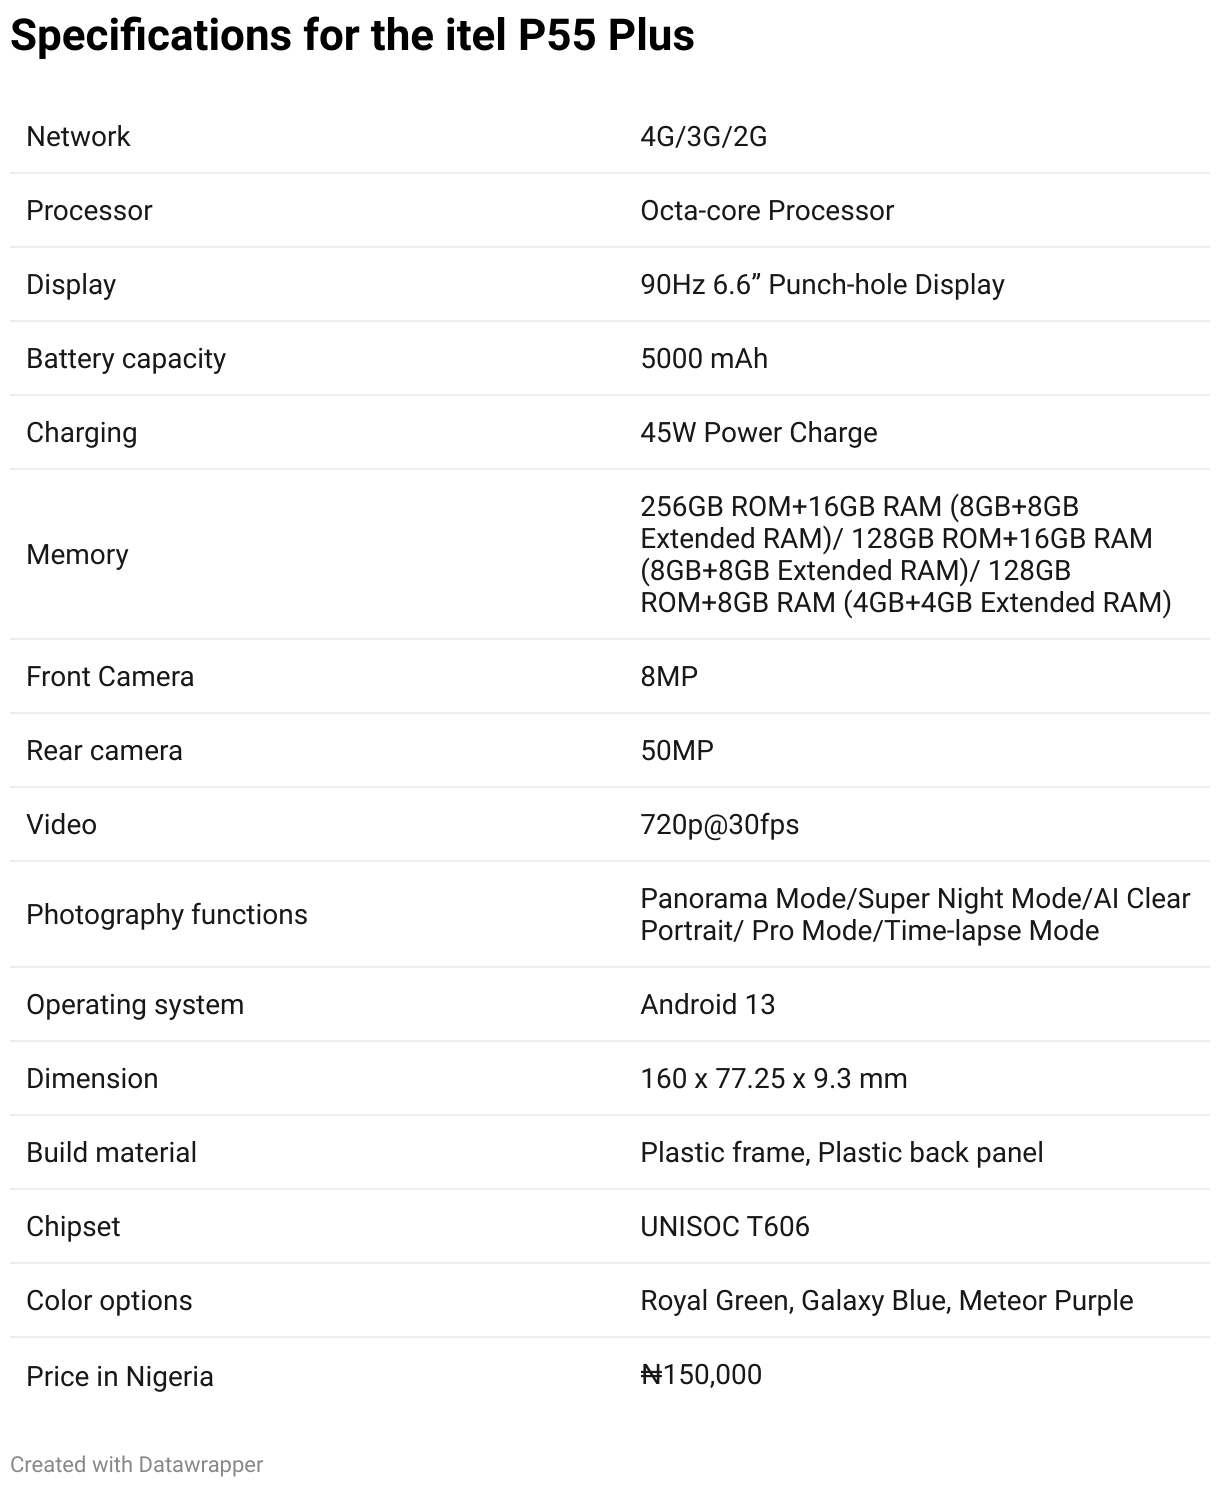 Full specifications guide for the itel P55 Plus